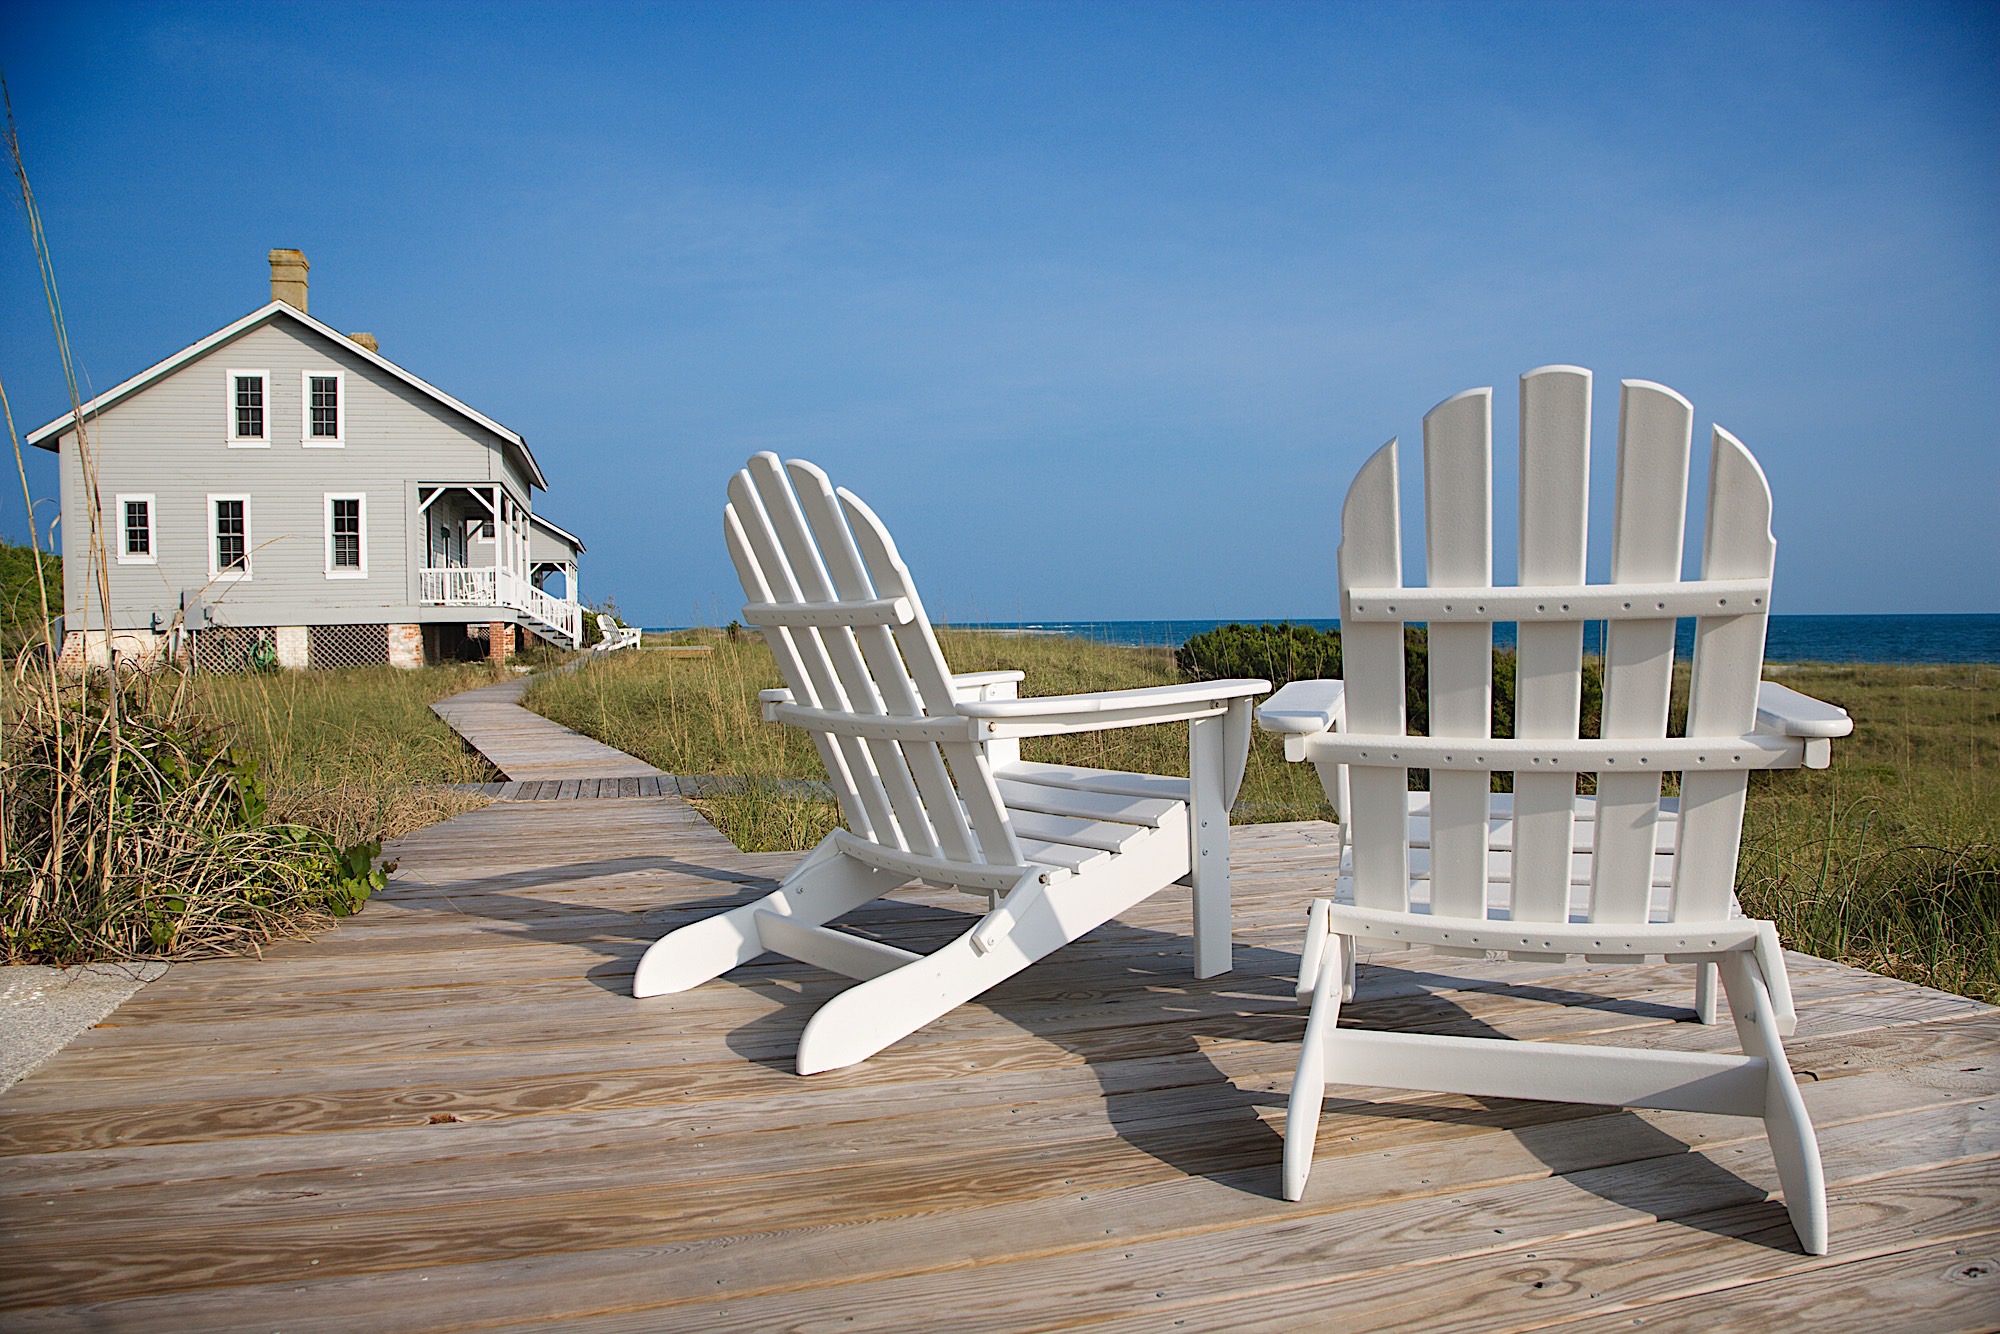 Are Vacation Houses A Smart Investment? CT Homes